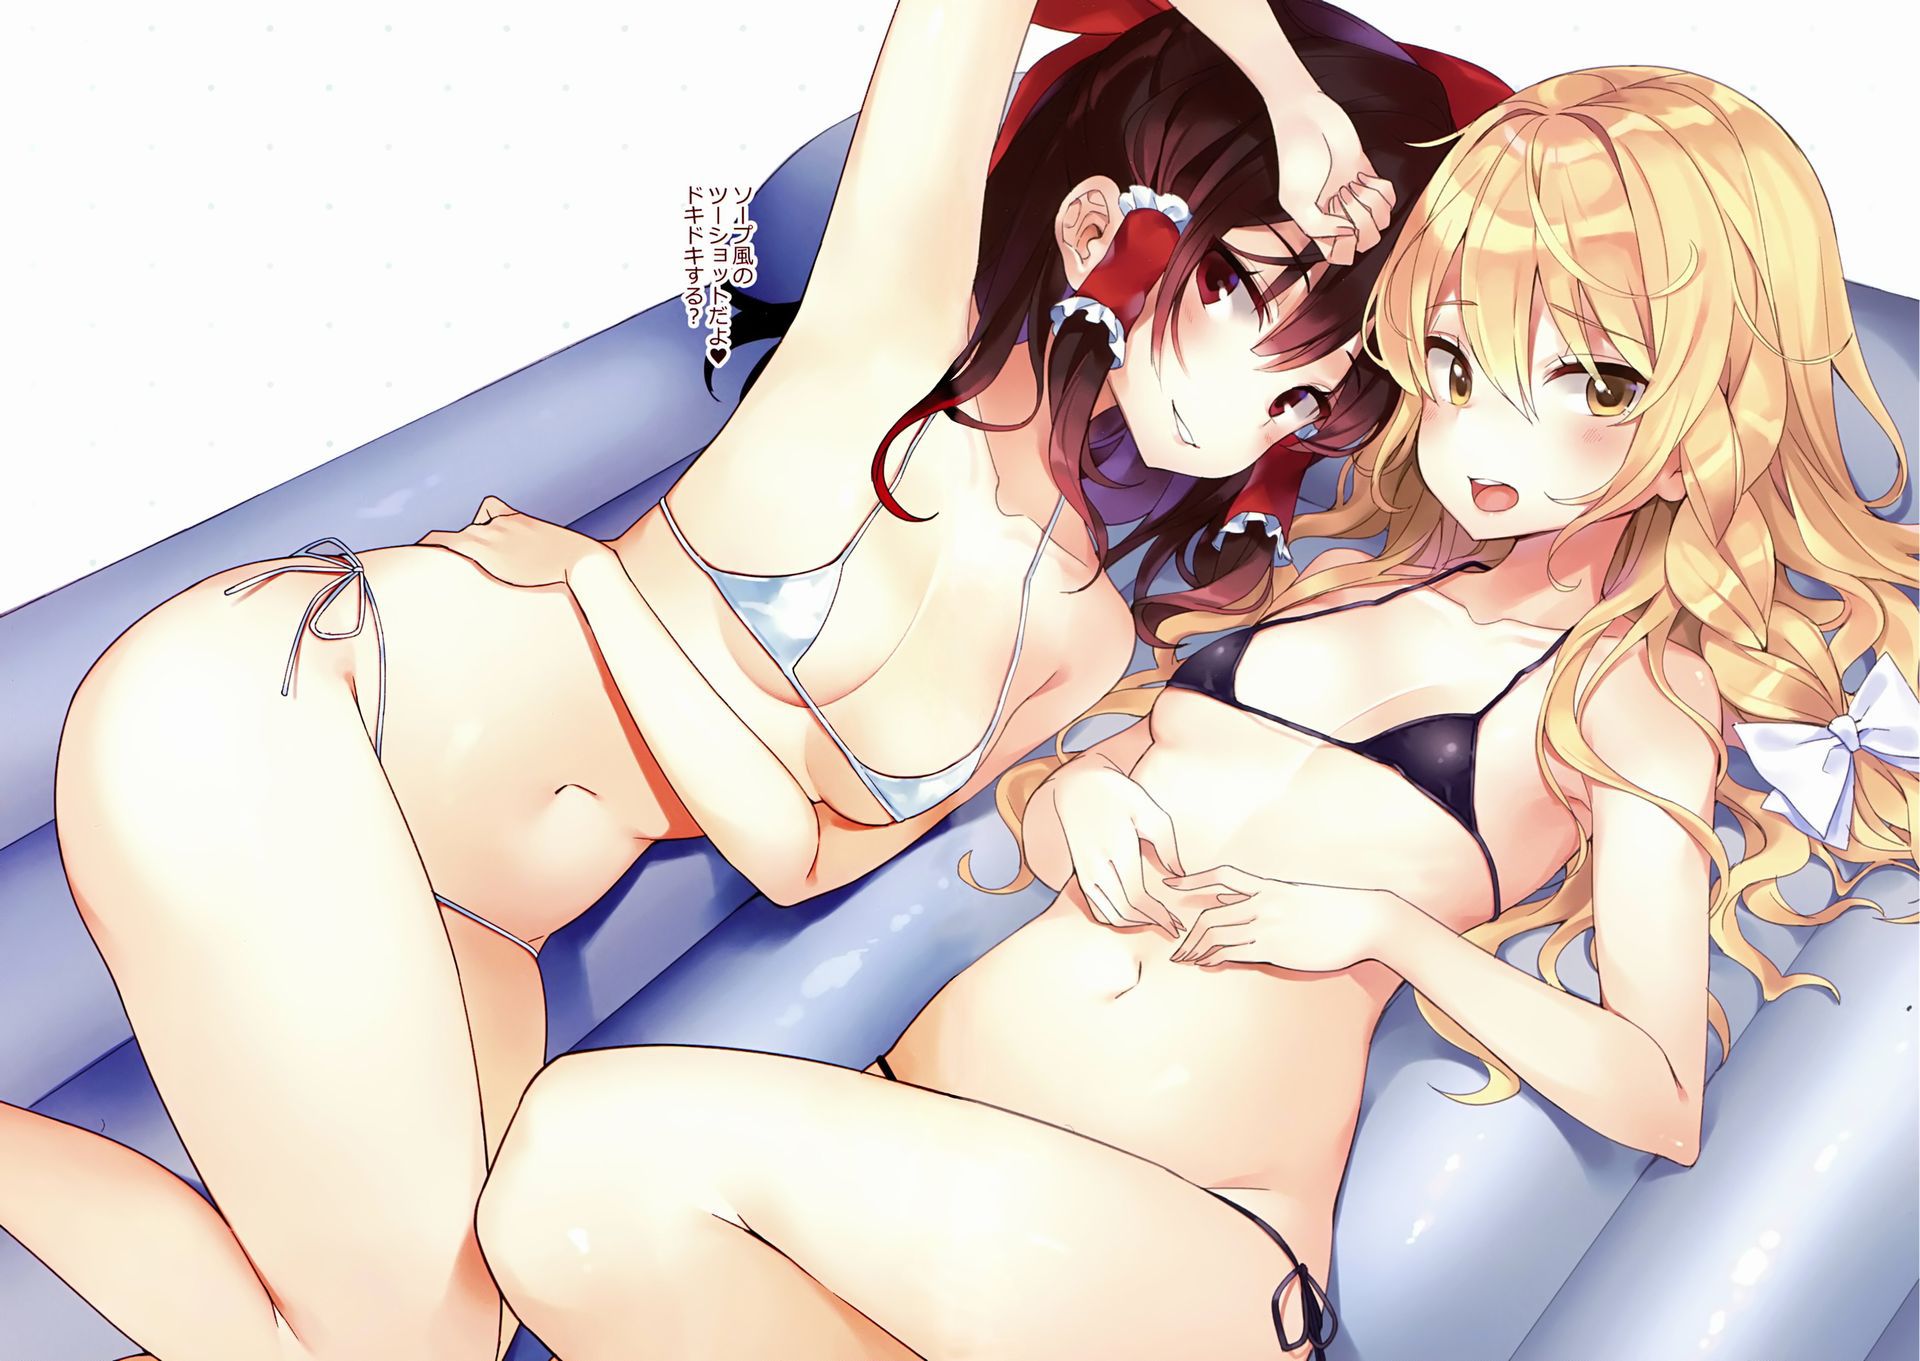 [Secondary/ZIP] armpit image to lick licking of rainbow girl 43